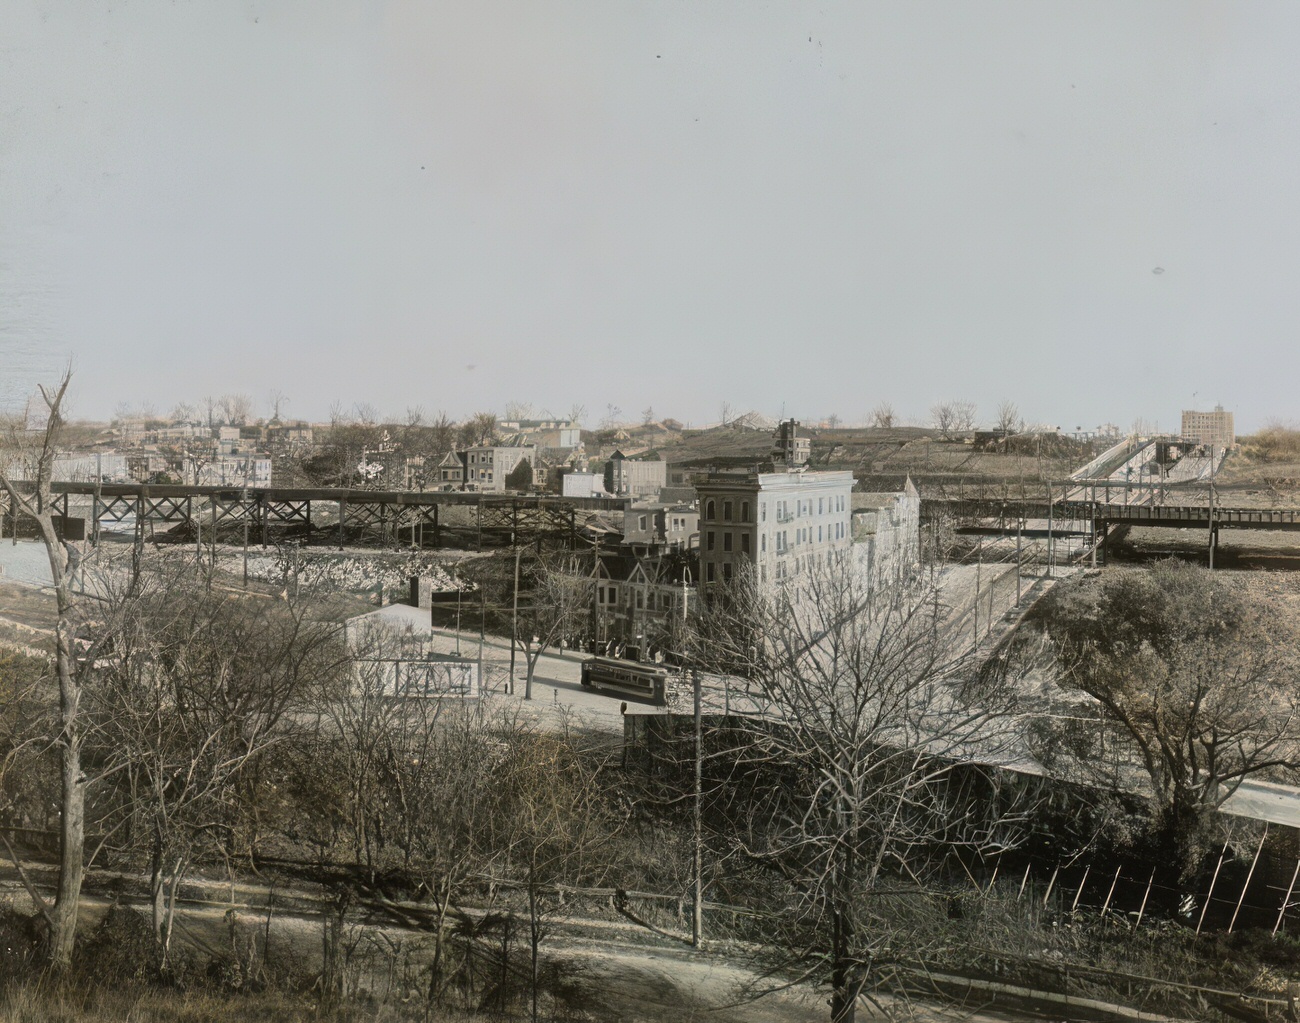 View From Huber Property On Anderson Avenue, Circa 1915.